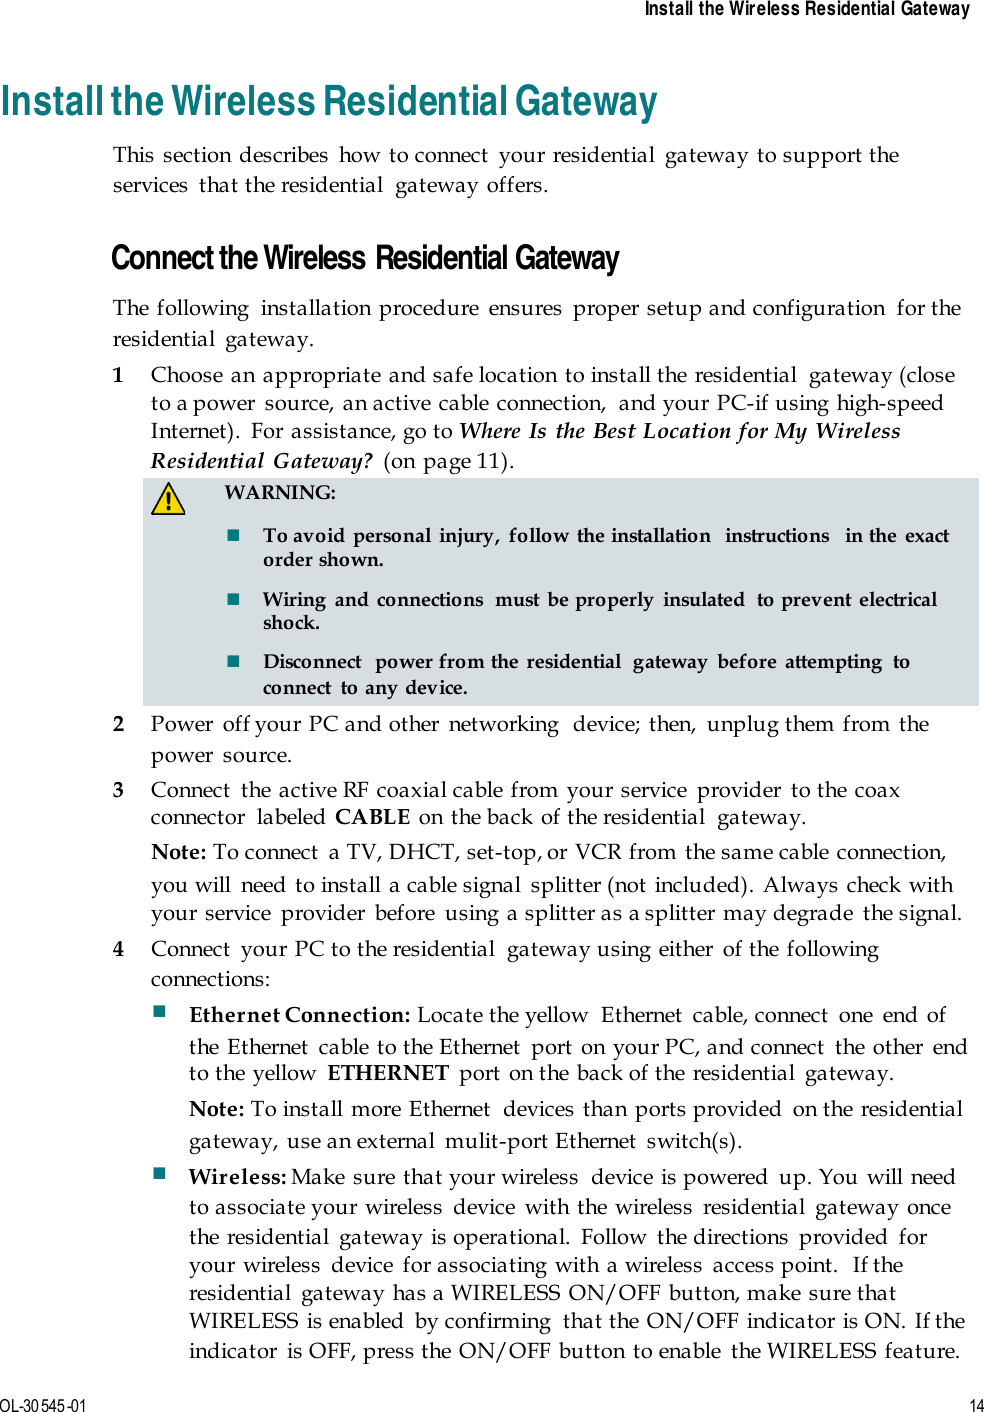    Install the Wireless Residential Gateway  OL-30 545-01  14  Install the Wireless Residential Gateway This section describes how to connect your residential gateway to support the services  that the residential  gateway offers.    Connect the Wireless Residential Gateway The following  installation procedure  ensures  proper setup and configuration  for the residential gateway. 1 Choose an appropriate and safe location to install the residential  gateway (close to a power source, an active cable connection,  and your PC-if using high-speed Internet).  For assistance, go to Where Is the Best Location for My Wireless Residential Gateway? (on page 11).   WARNING:  To avoid personal injury, follow the installation  instructions  in the exact order shown.  Wiring and connections  must be properly insulated  to prevent electrical shock.  Disconnect  power from the residential  gateway before attempting to connect  to any device. 2 Power off your PC and other networking  device; then, unplug them from the power source. 3 Connect the active RF coaxial cable from your service provider to the coax connector labeled CABLE on the back of the residential  gateway. Note: To connect  a TV, DHCT, set-top, or VCR from the same cable connection, you will need to install a cable signal splitter (not included). Always check with your service  provider  before  using a splitter as a splitter may degrade  the signal. 4 Connect  your PC to the residential  gateway using either  of the following connections:  Ethernet Connection: Locate the yellow  Ethernet  cable, connect  one  end of the Ethernet  cable to the Ethernet  port on your PC, and connect  the other  end to the yellow  ETHERNET port on the back of the residential  gateway. Note: To install more Ethernet  devices than ports provided on the residential gateway, use an external  mulit-port Ethernet  switch(s).  Wireless: Make sure that your wireless  device is powered up. You will need to associate your wireless device with the wireless residential gateway once the residential gateway is operational. Follow the directions provided for your wireless  device  for associating with a wireless  access point.  If the residential  gateway has a WIRELESS ON/OFF button, make sure that WIRELESS is enabled by confirming  that the ON/OFF indicator is ON. If the indicator  is OFF, press the ON/OFF button to enable  the WIRELESS feature. 